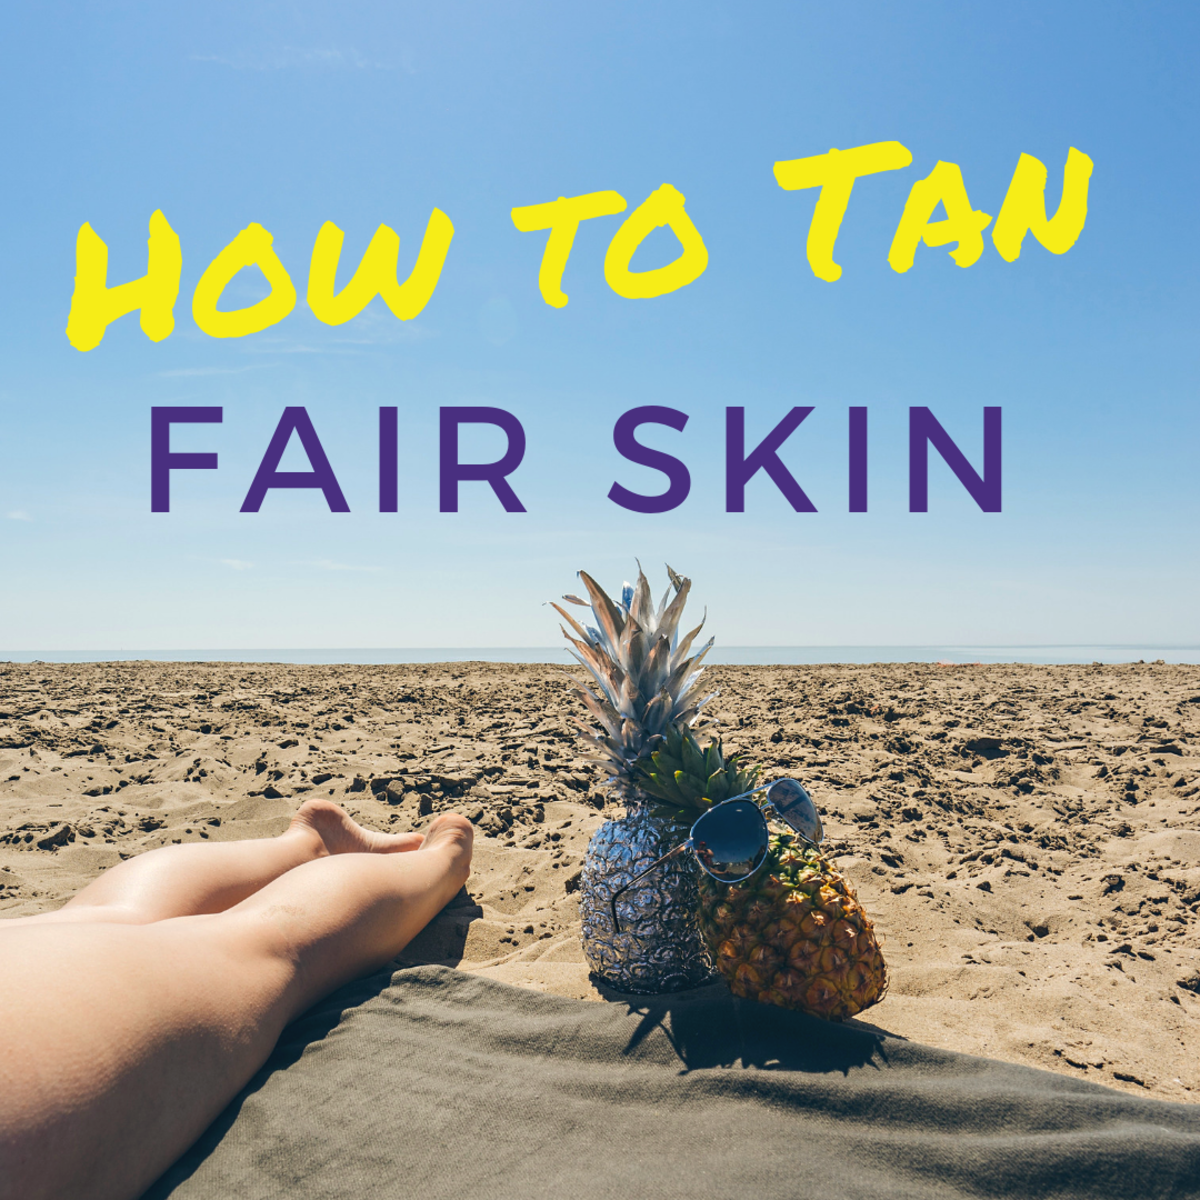 How To Get A Real Tan If You're Fair, Pale, or Just Can't Tan! - Carrot Sun®  Tan Accelerators